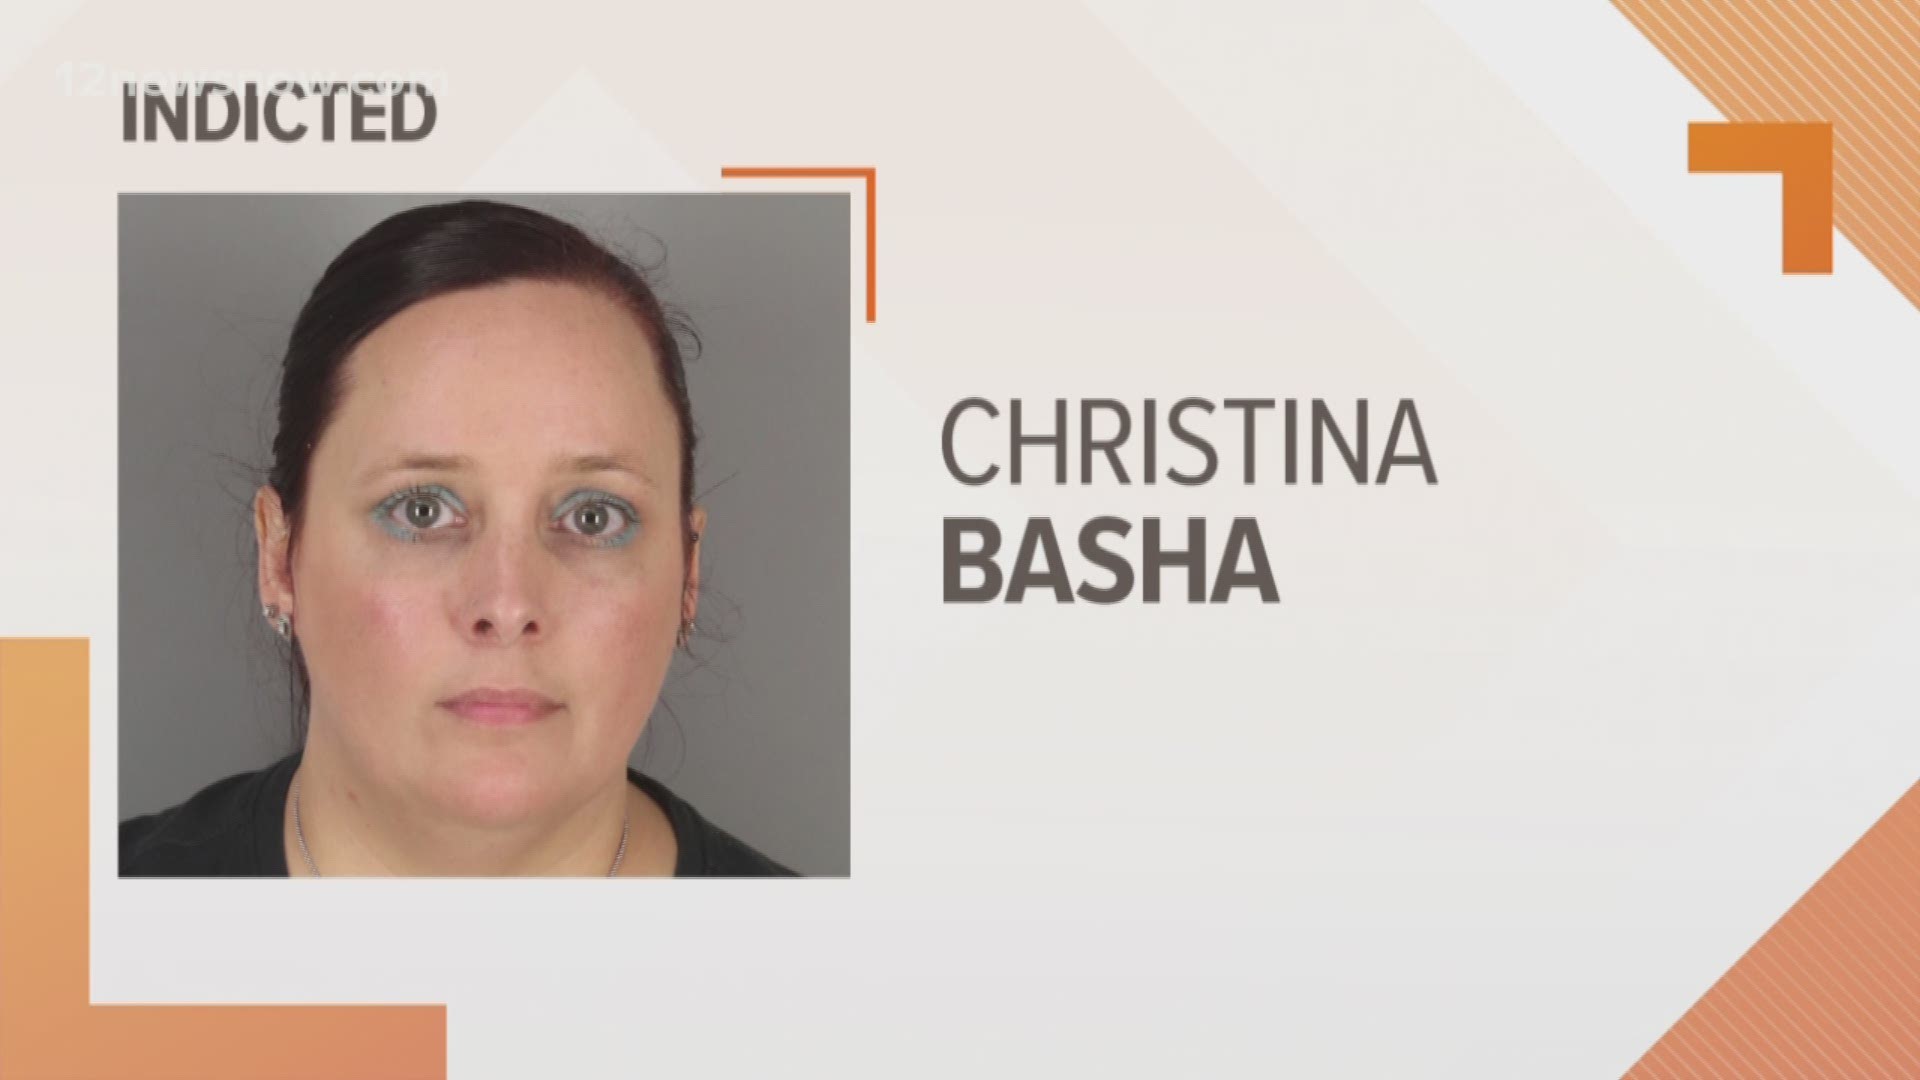 Investigators say Christina Basha had prescriptions filled for herself and at least 21 others.